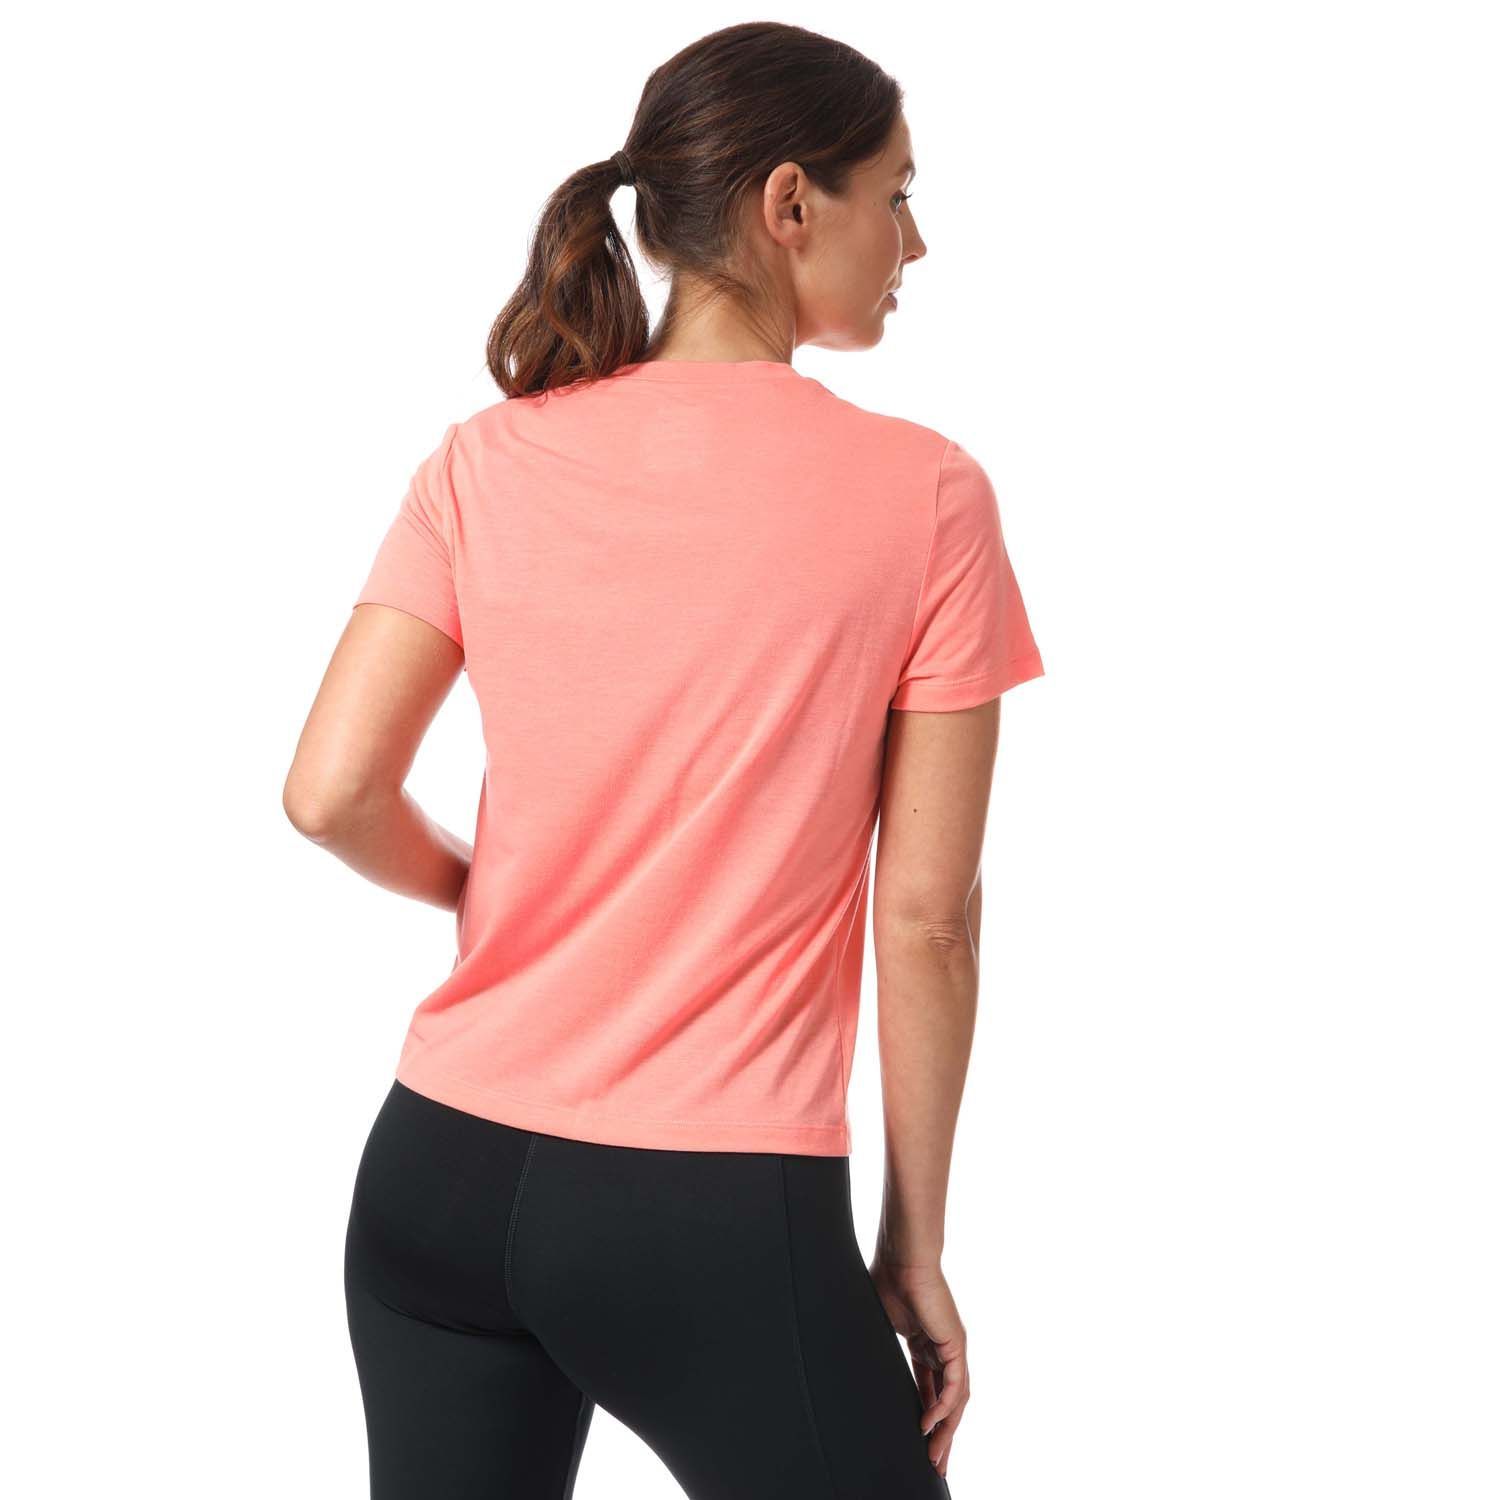 Womens Reebok Workout Ready Supremium Big Logo T- Shirt in coral.-Crew neck.- Short sleeves.- Supremium fabric offers lightweight comfort.- Reebok branding to the chest.- Speedwick fabric wicks sweat to help you stay cool and dry.- Slim fit.- Main Material: 65% Polyester  35% Rayon. - Ref: GI6865